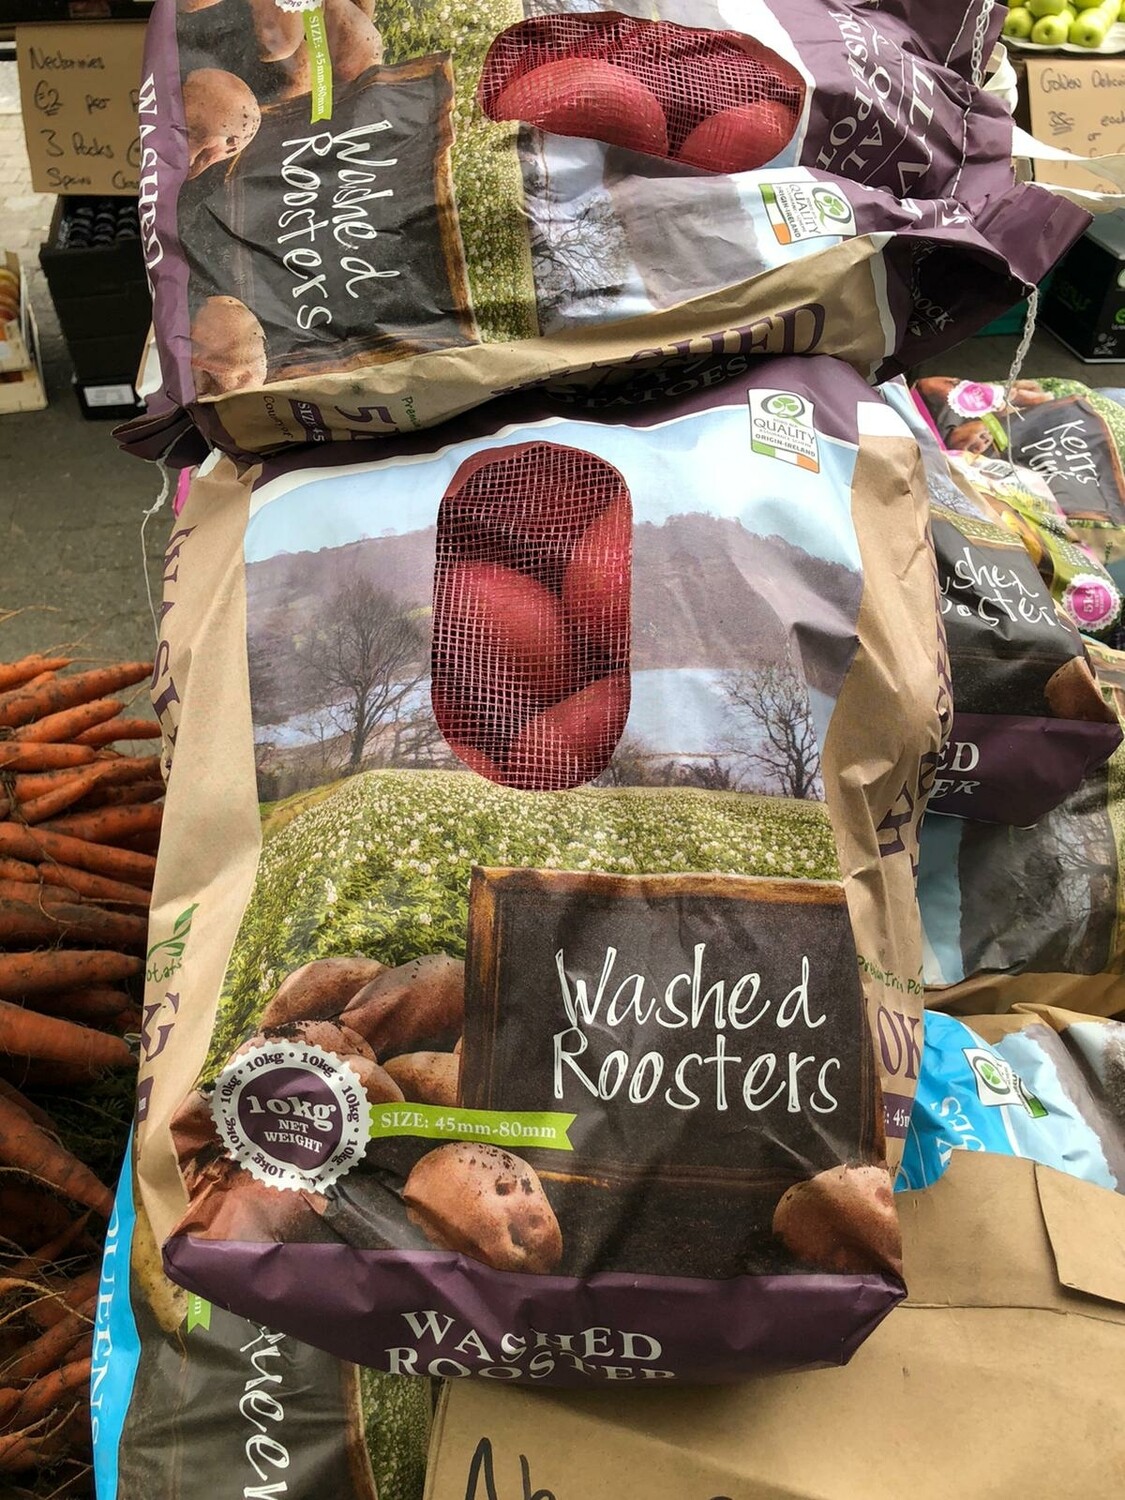 Washed roosters 10kg